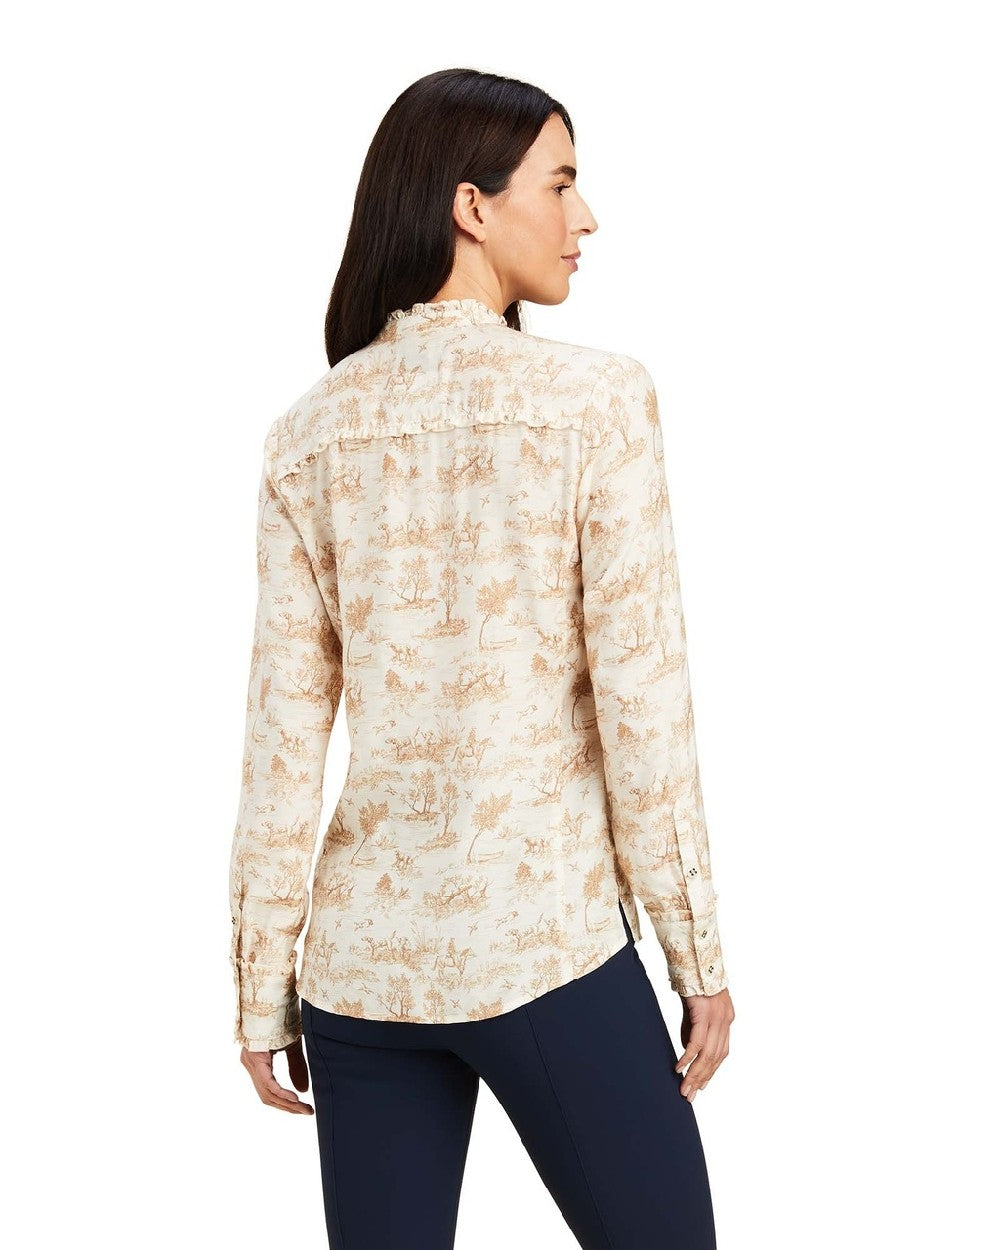 Toile Ariat Womens Clarion Blouse on White background 